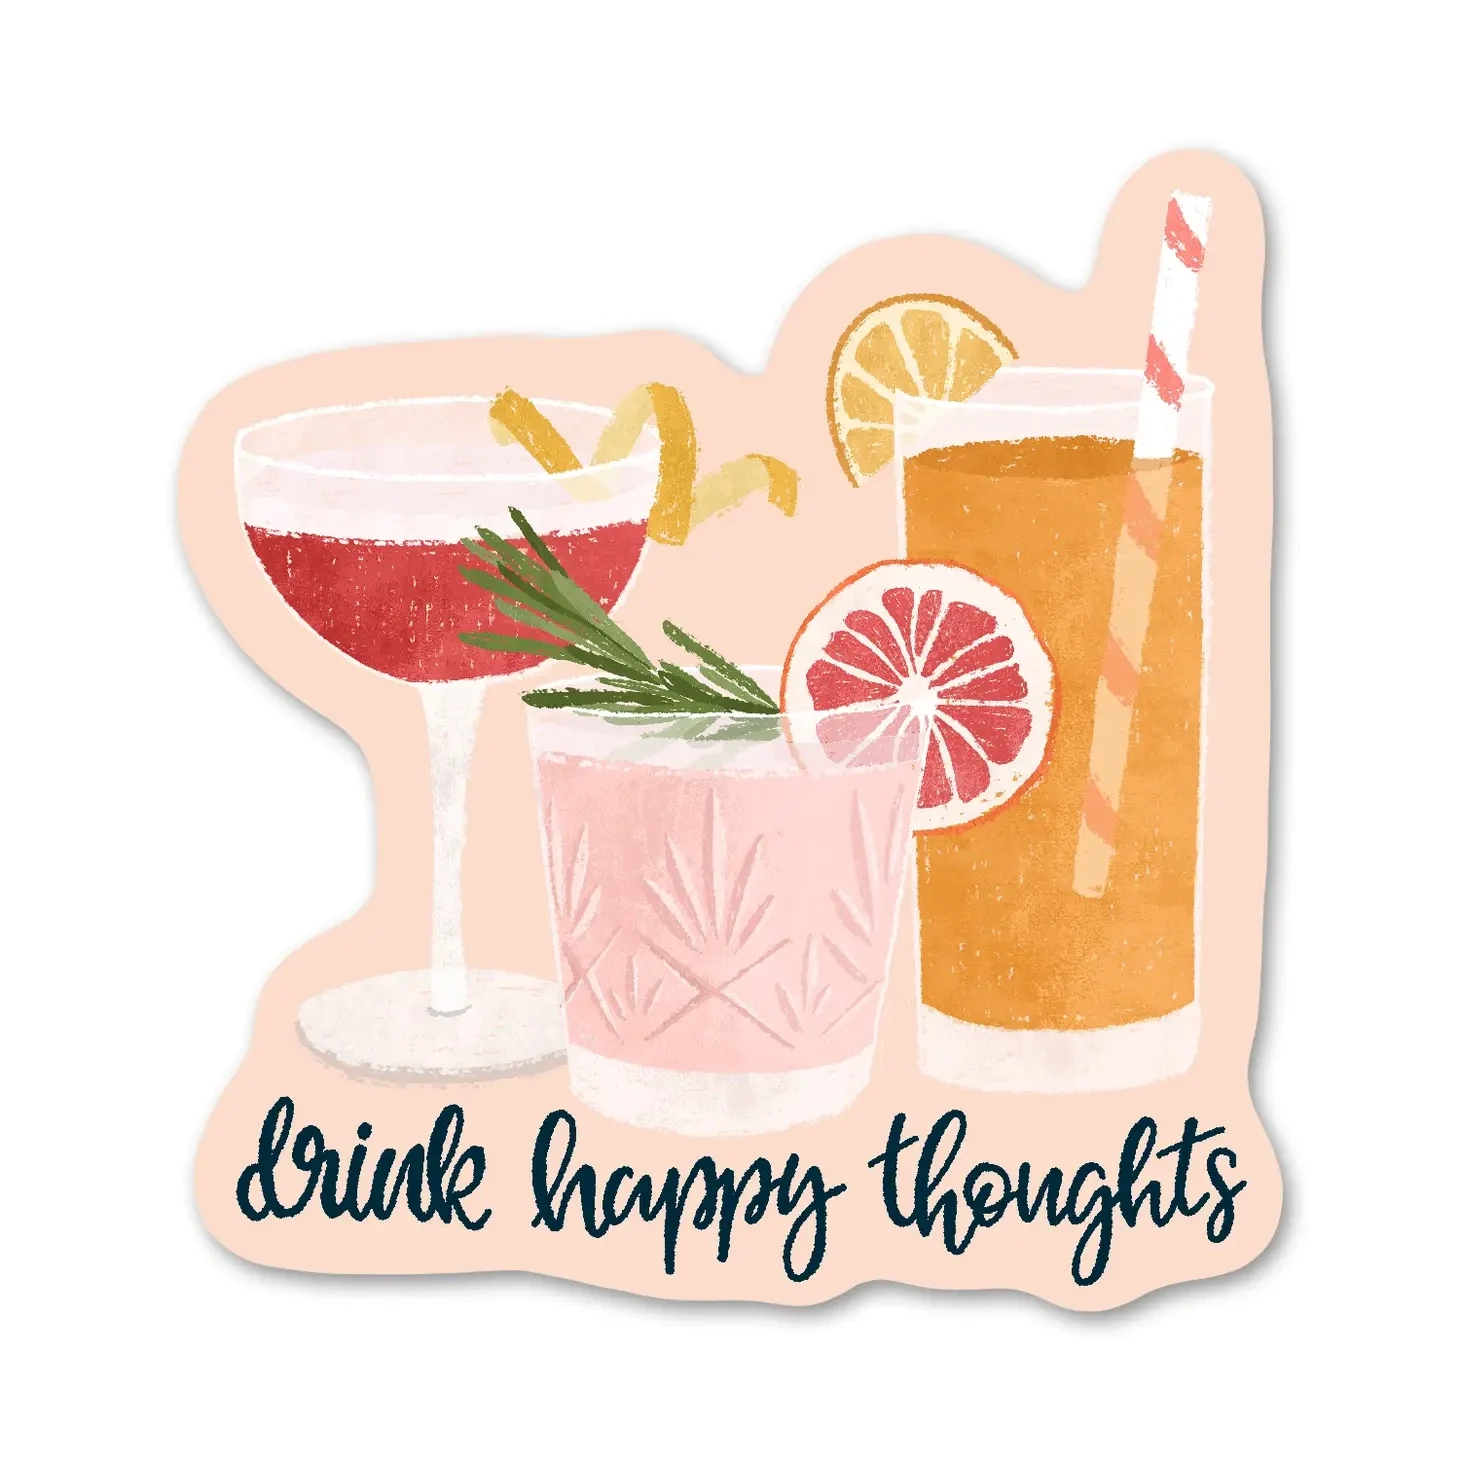 Drink Happy Thoughts Sticker